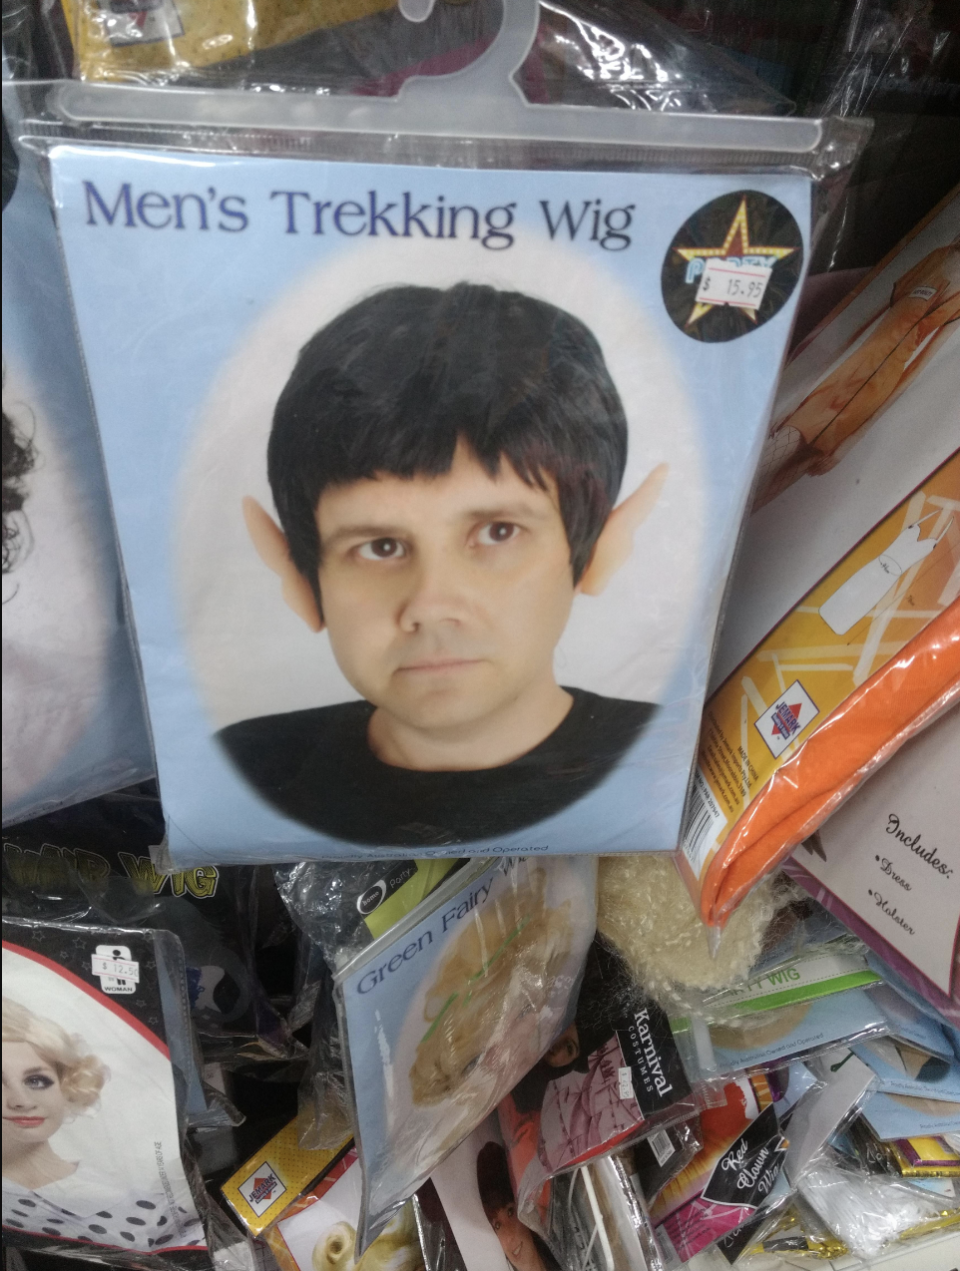 off brand star trek wig for men with pointy ears